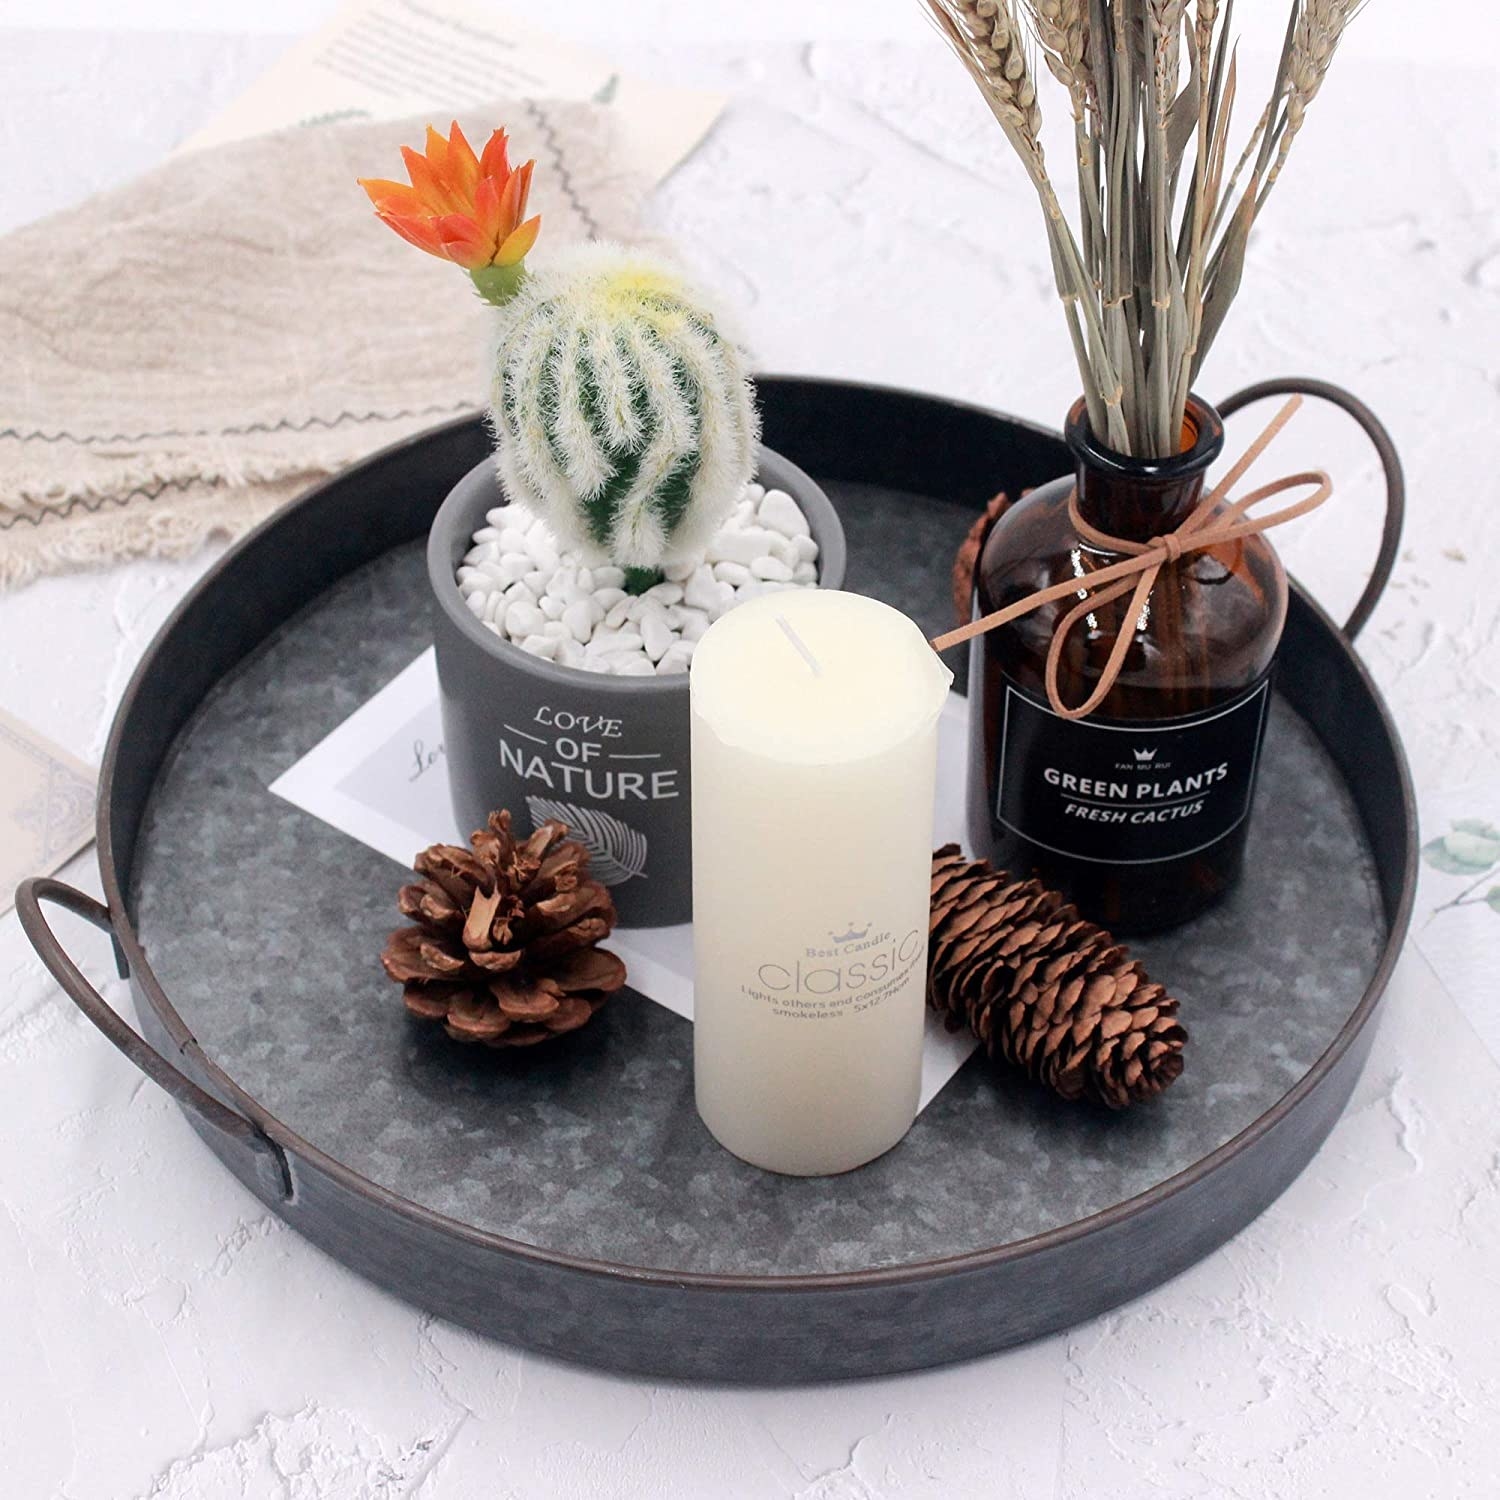 the tray with pines cones, a candle and a daux cactus in it